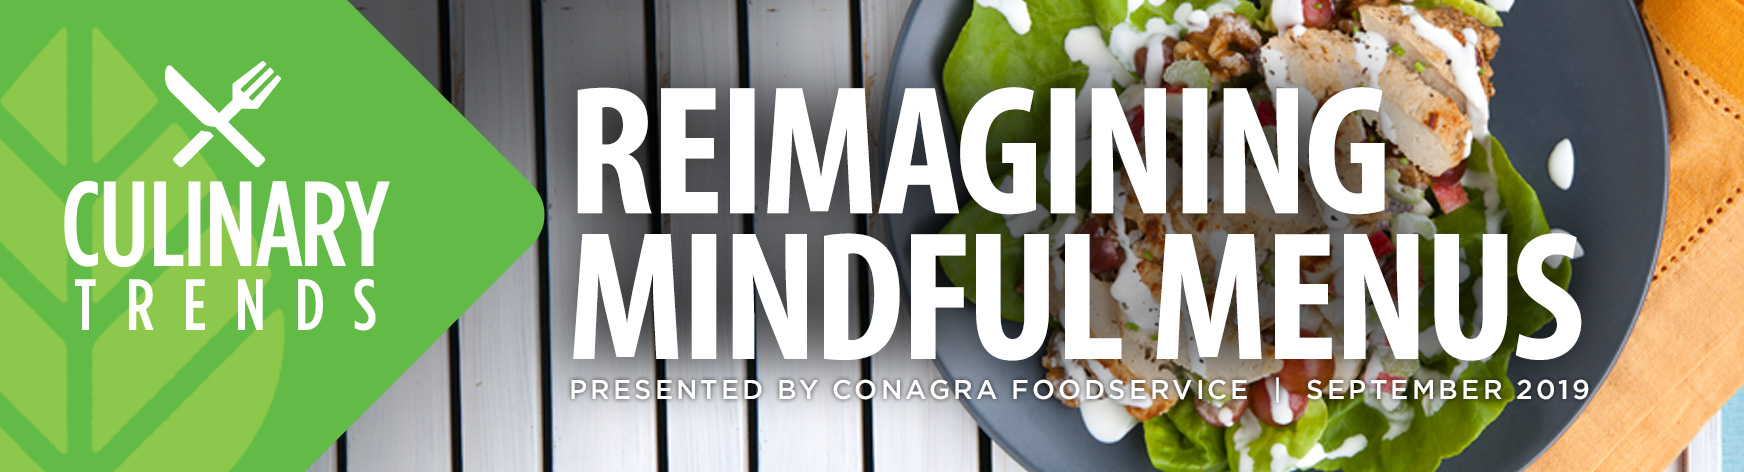 Culinary Trends: Reimagining Mindful Menus Presented by Conagra Foodservice